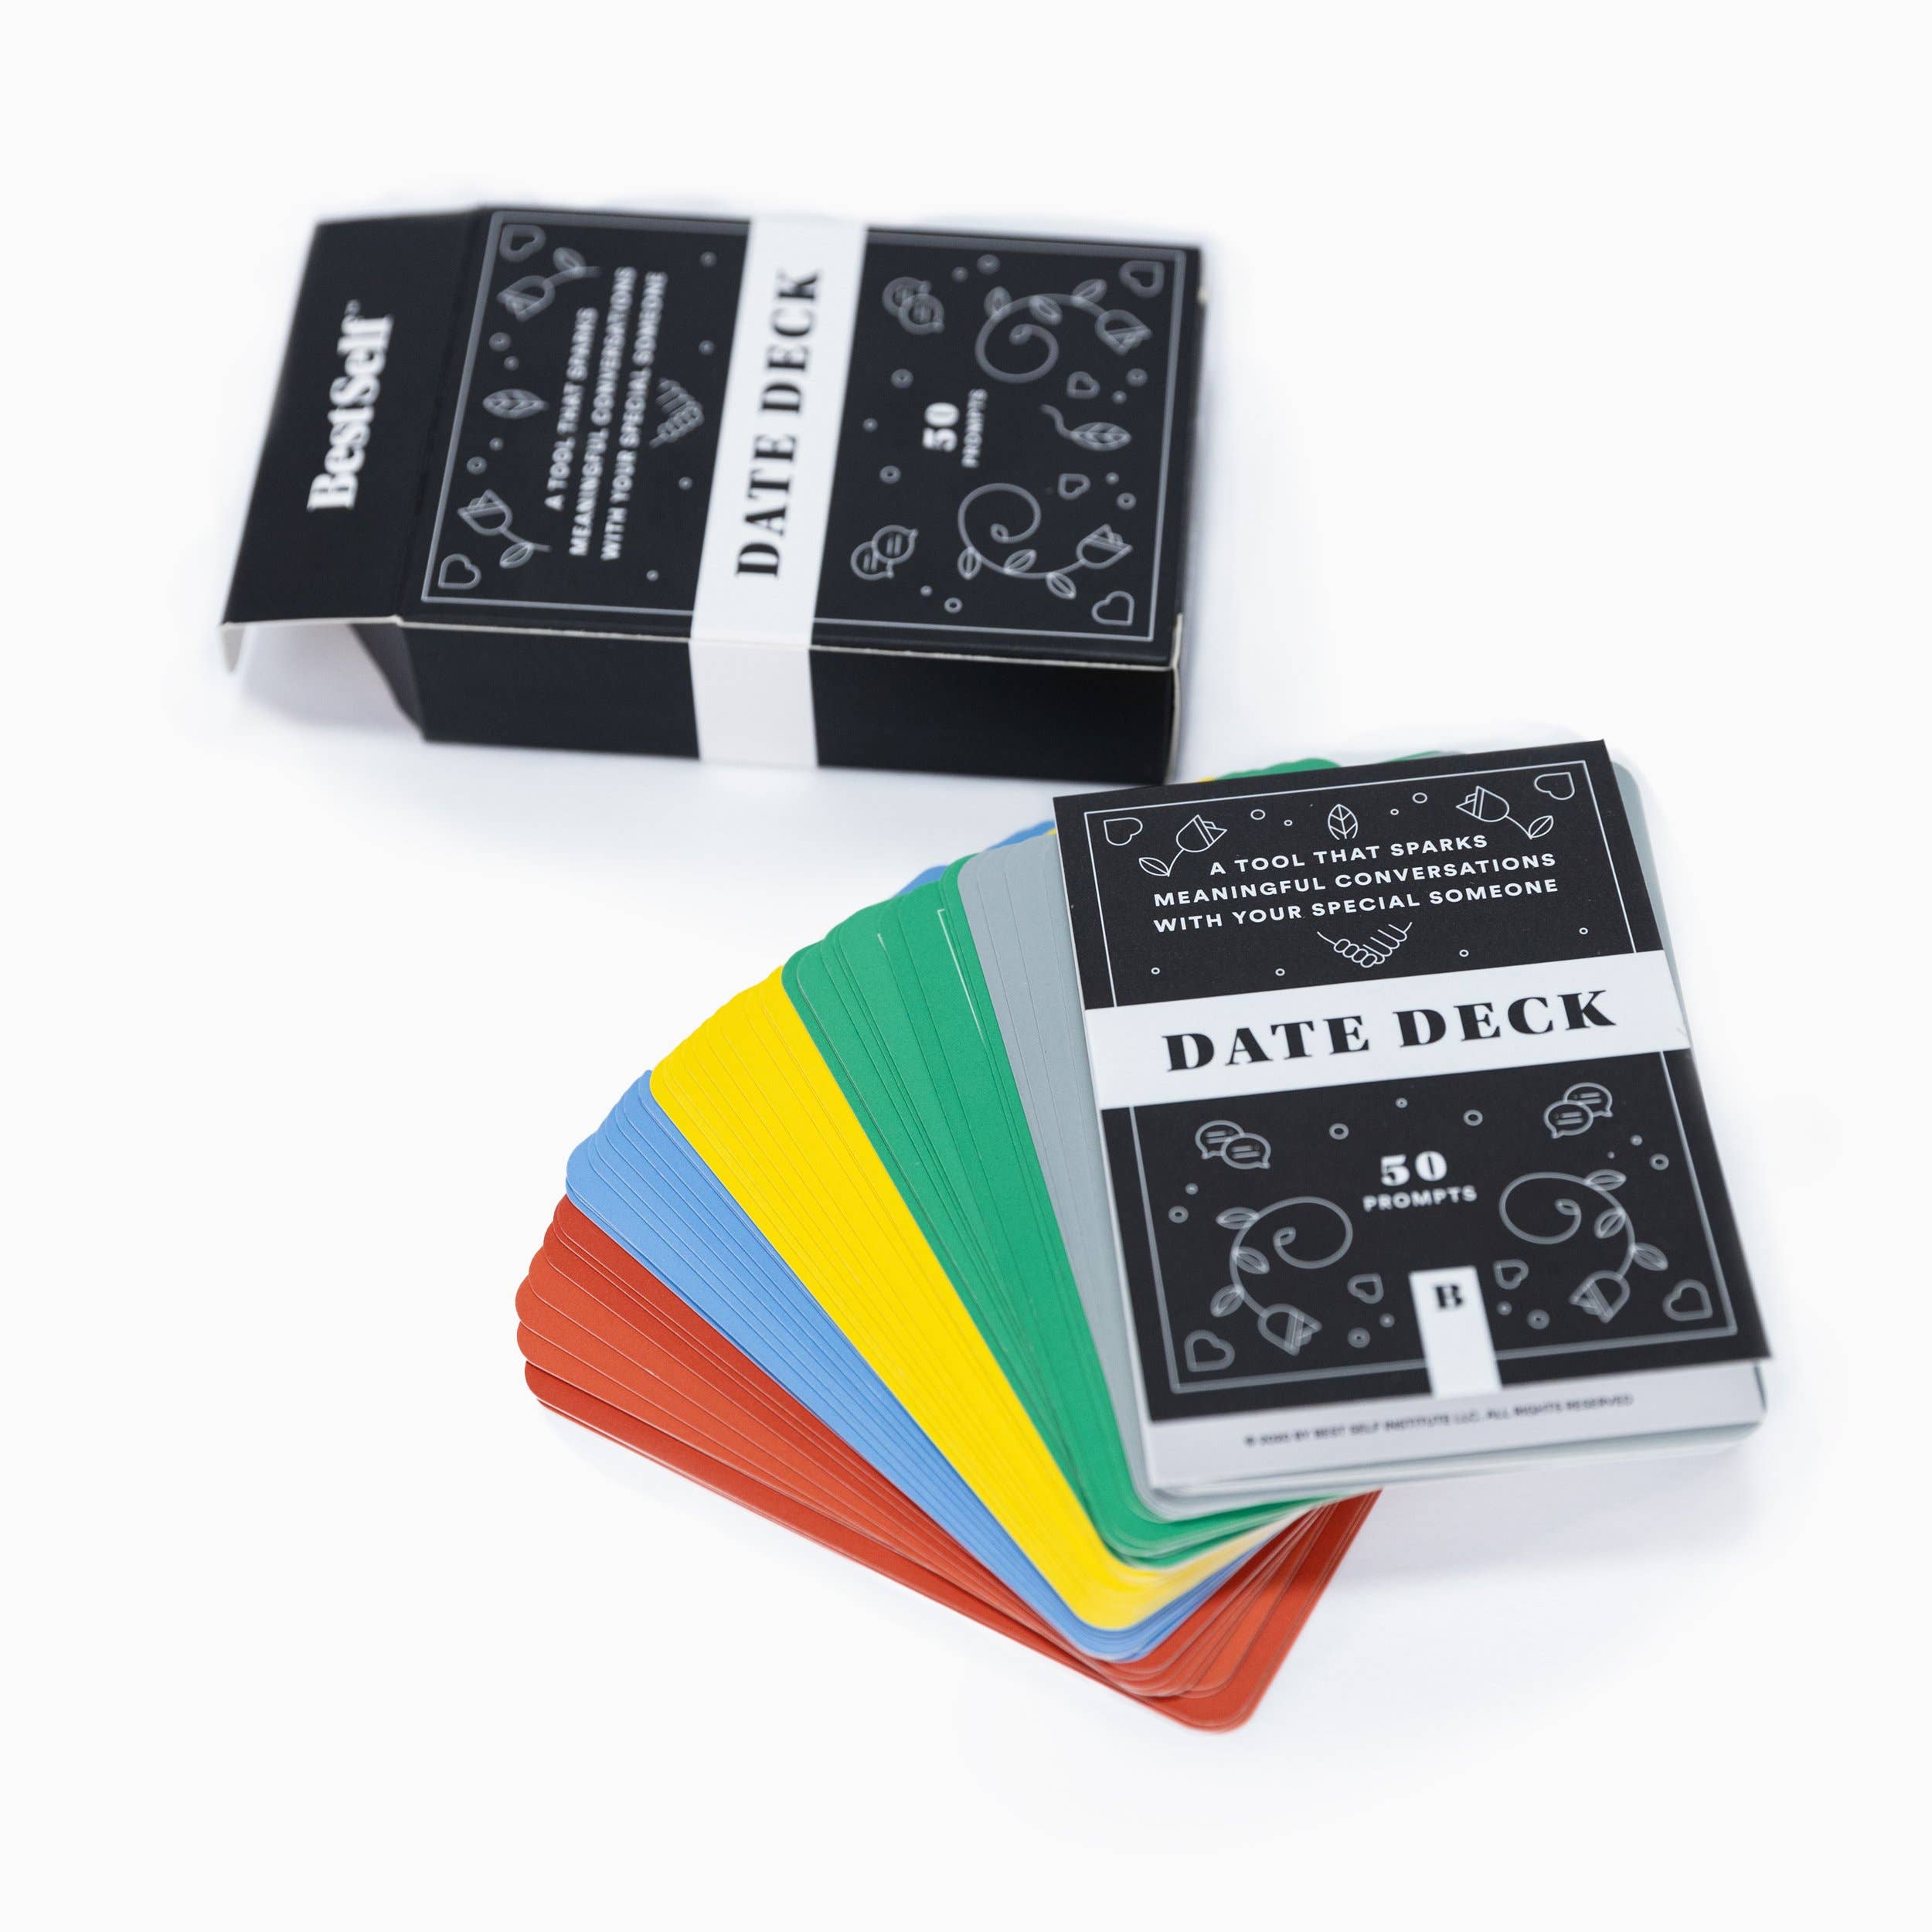 Date Deck - Date Night Card Game with 50 Prompts for Couples Games + Playing Cards